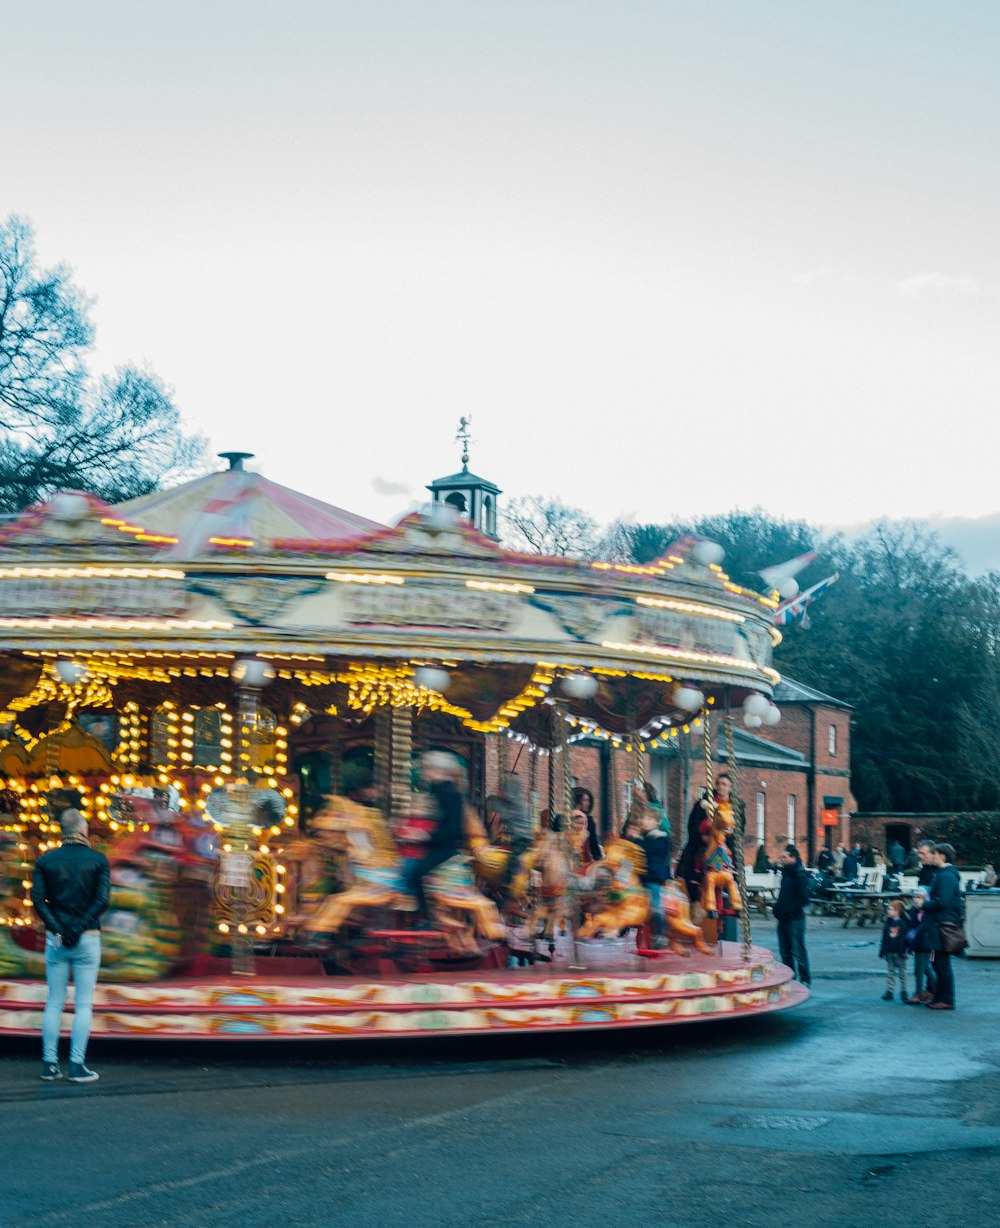 time-lapse photography of a spinning carousel under a calm blue sky